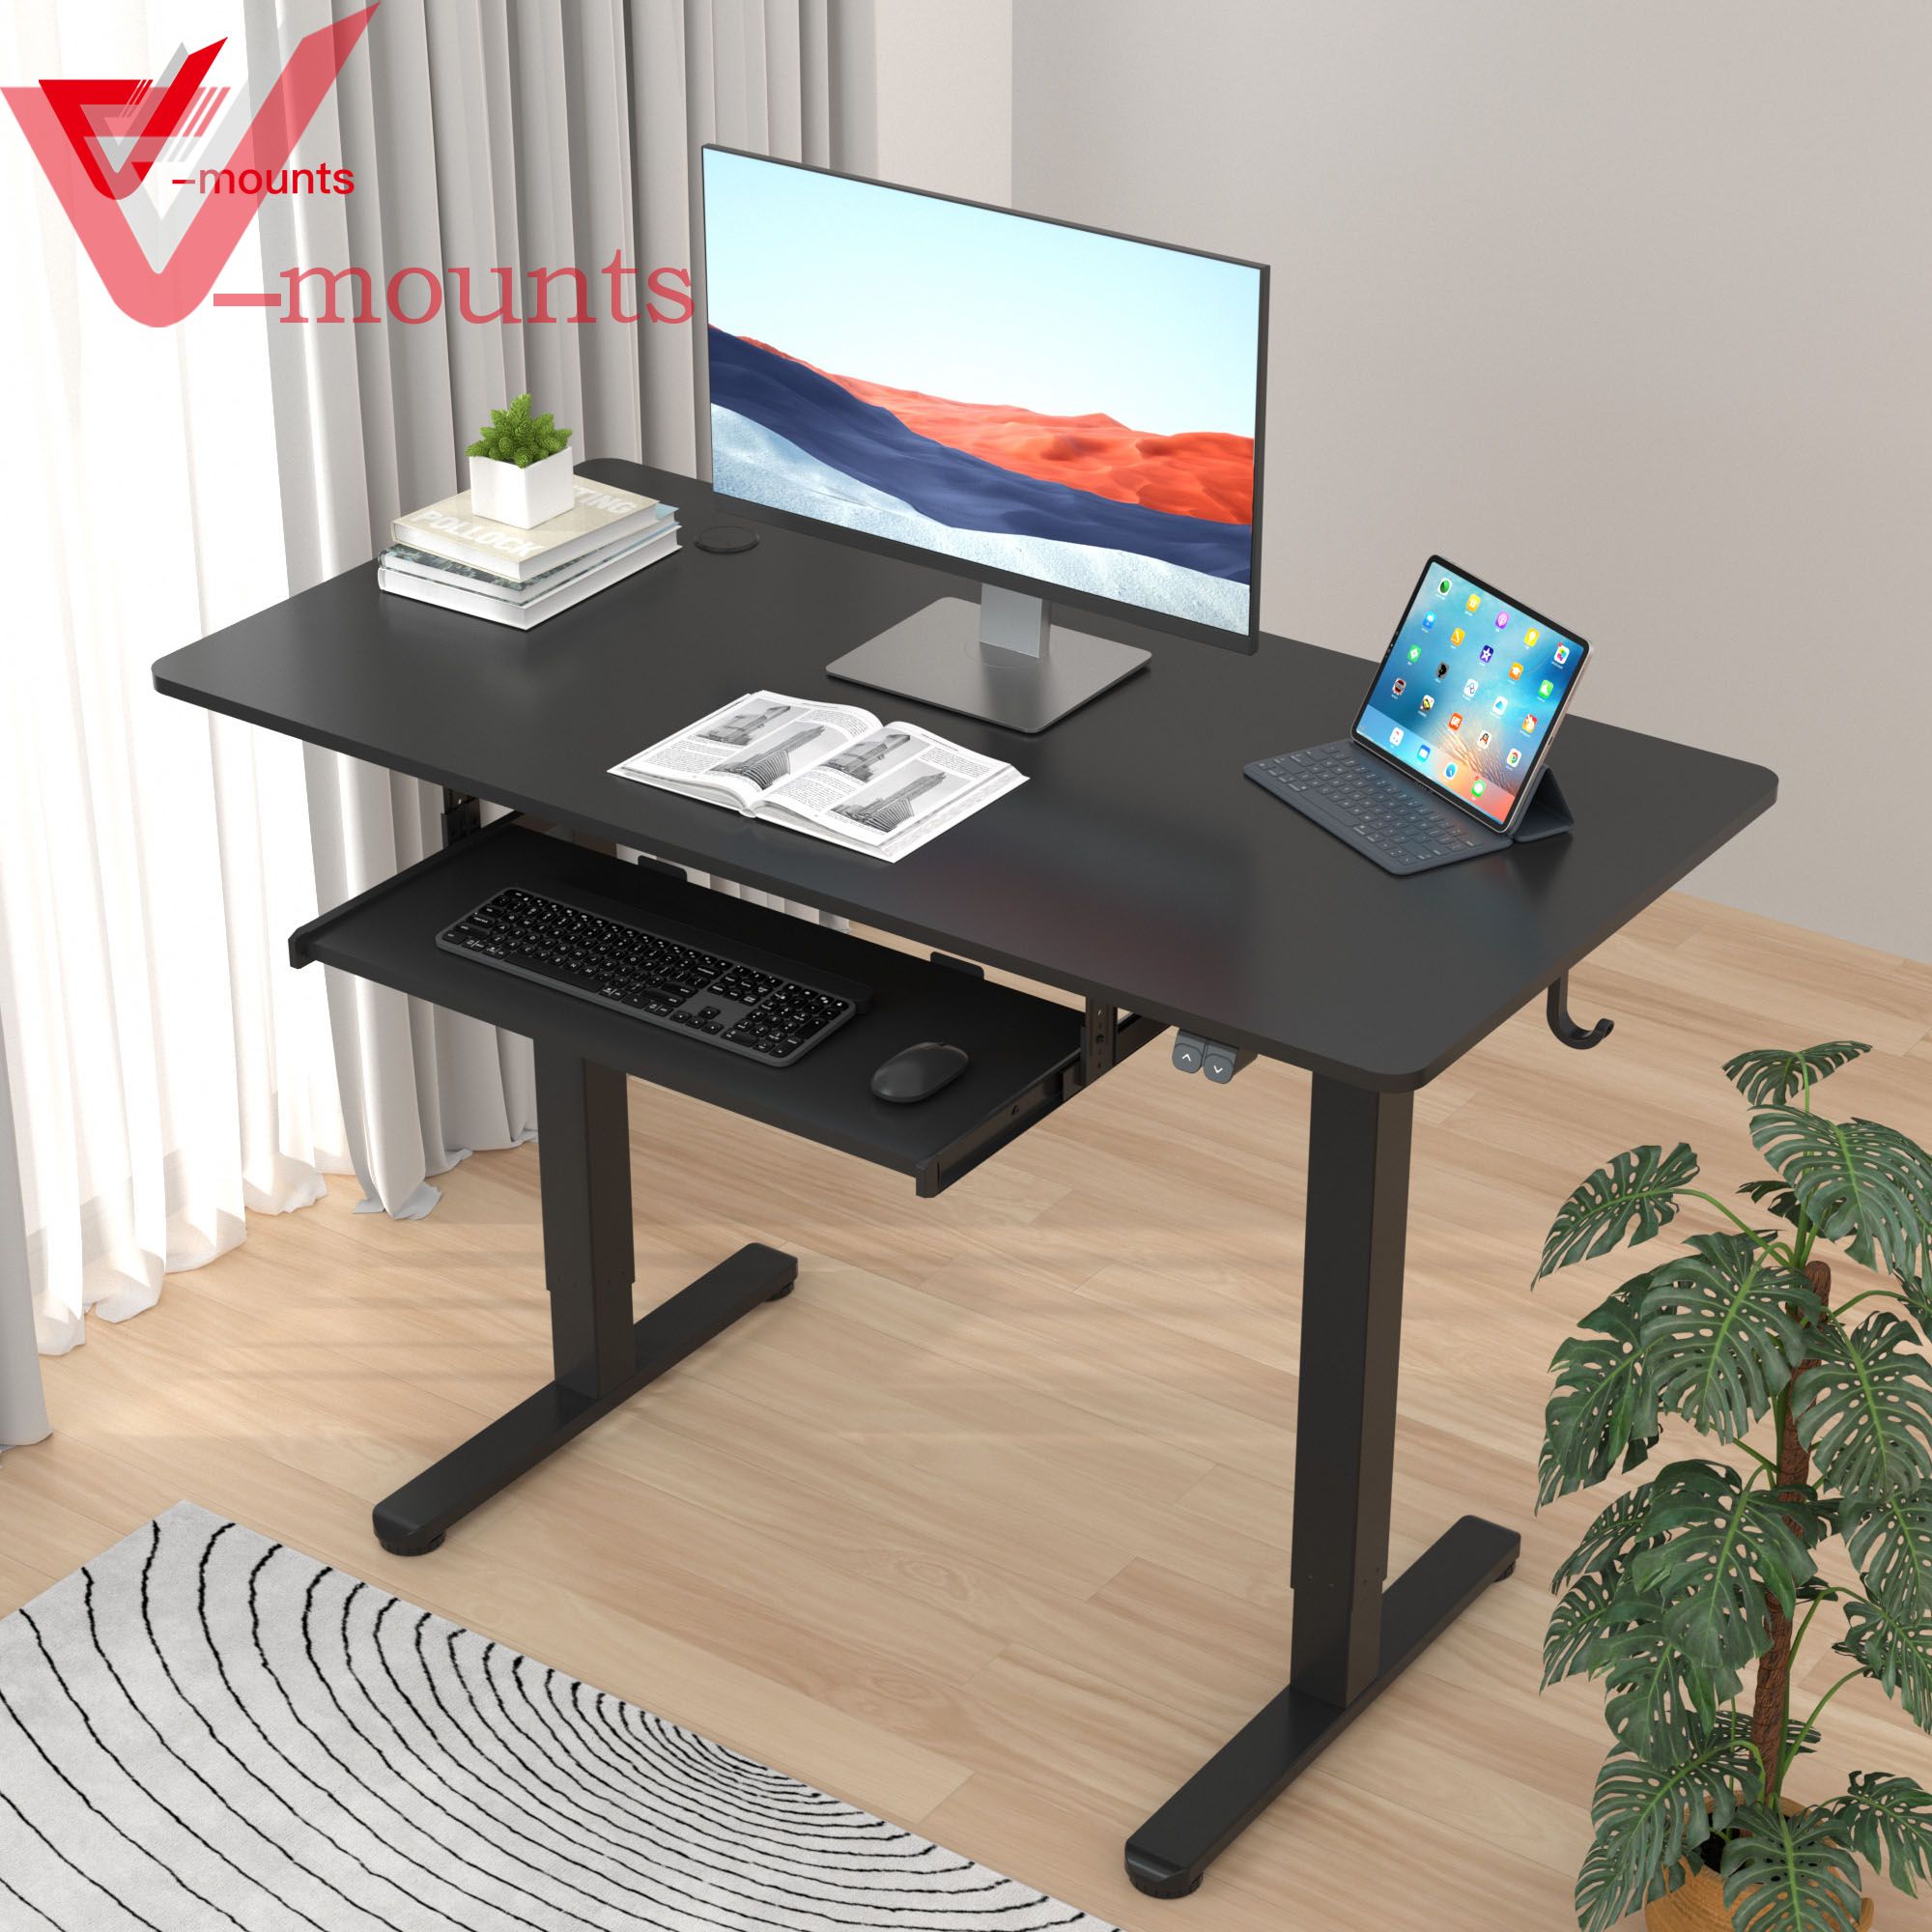 V-mounts ErgoFusion Affordable Black Single Motor Height Adjustable Electric Standing Desk With Keyboard Tray VM-JSD5-01-2P-X